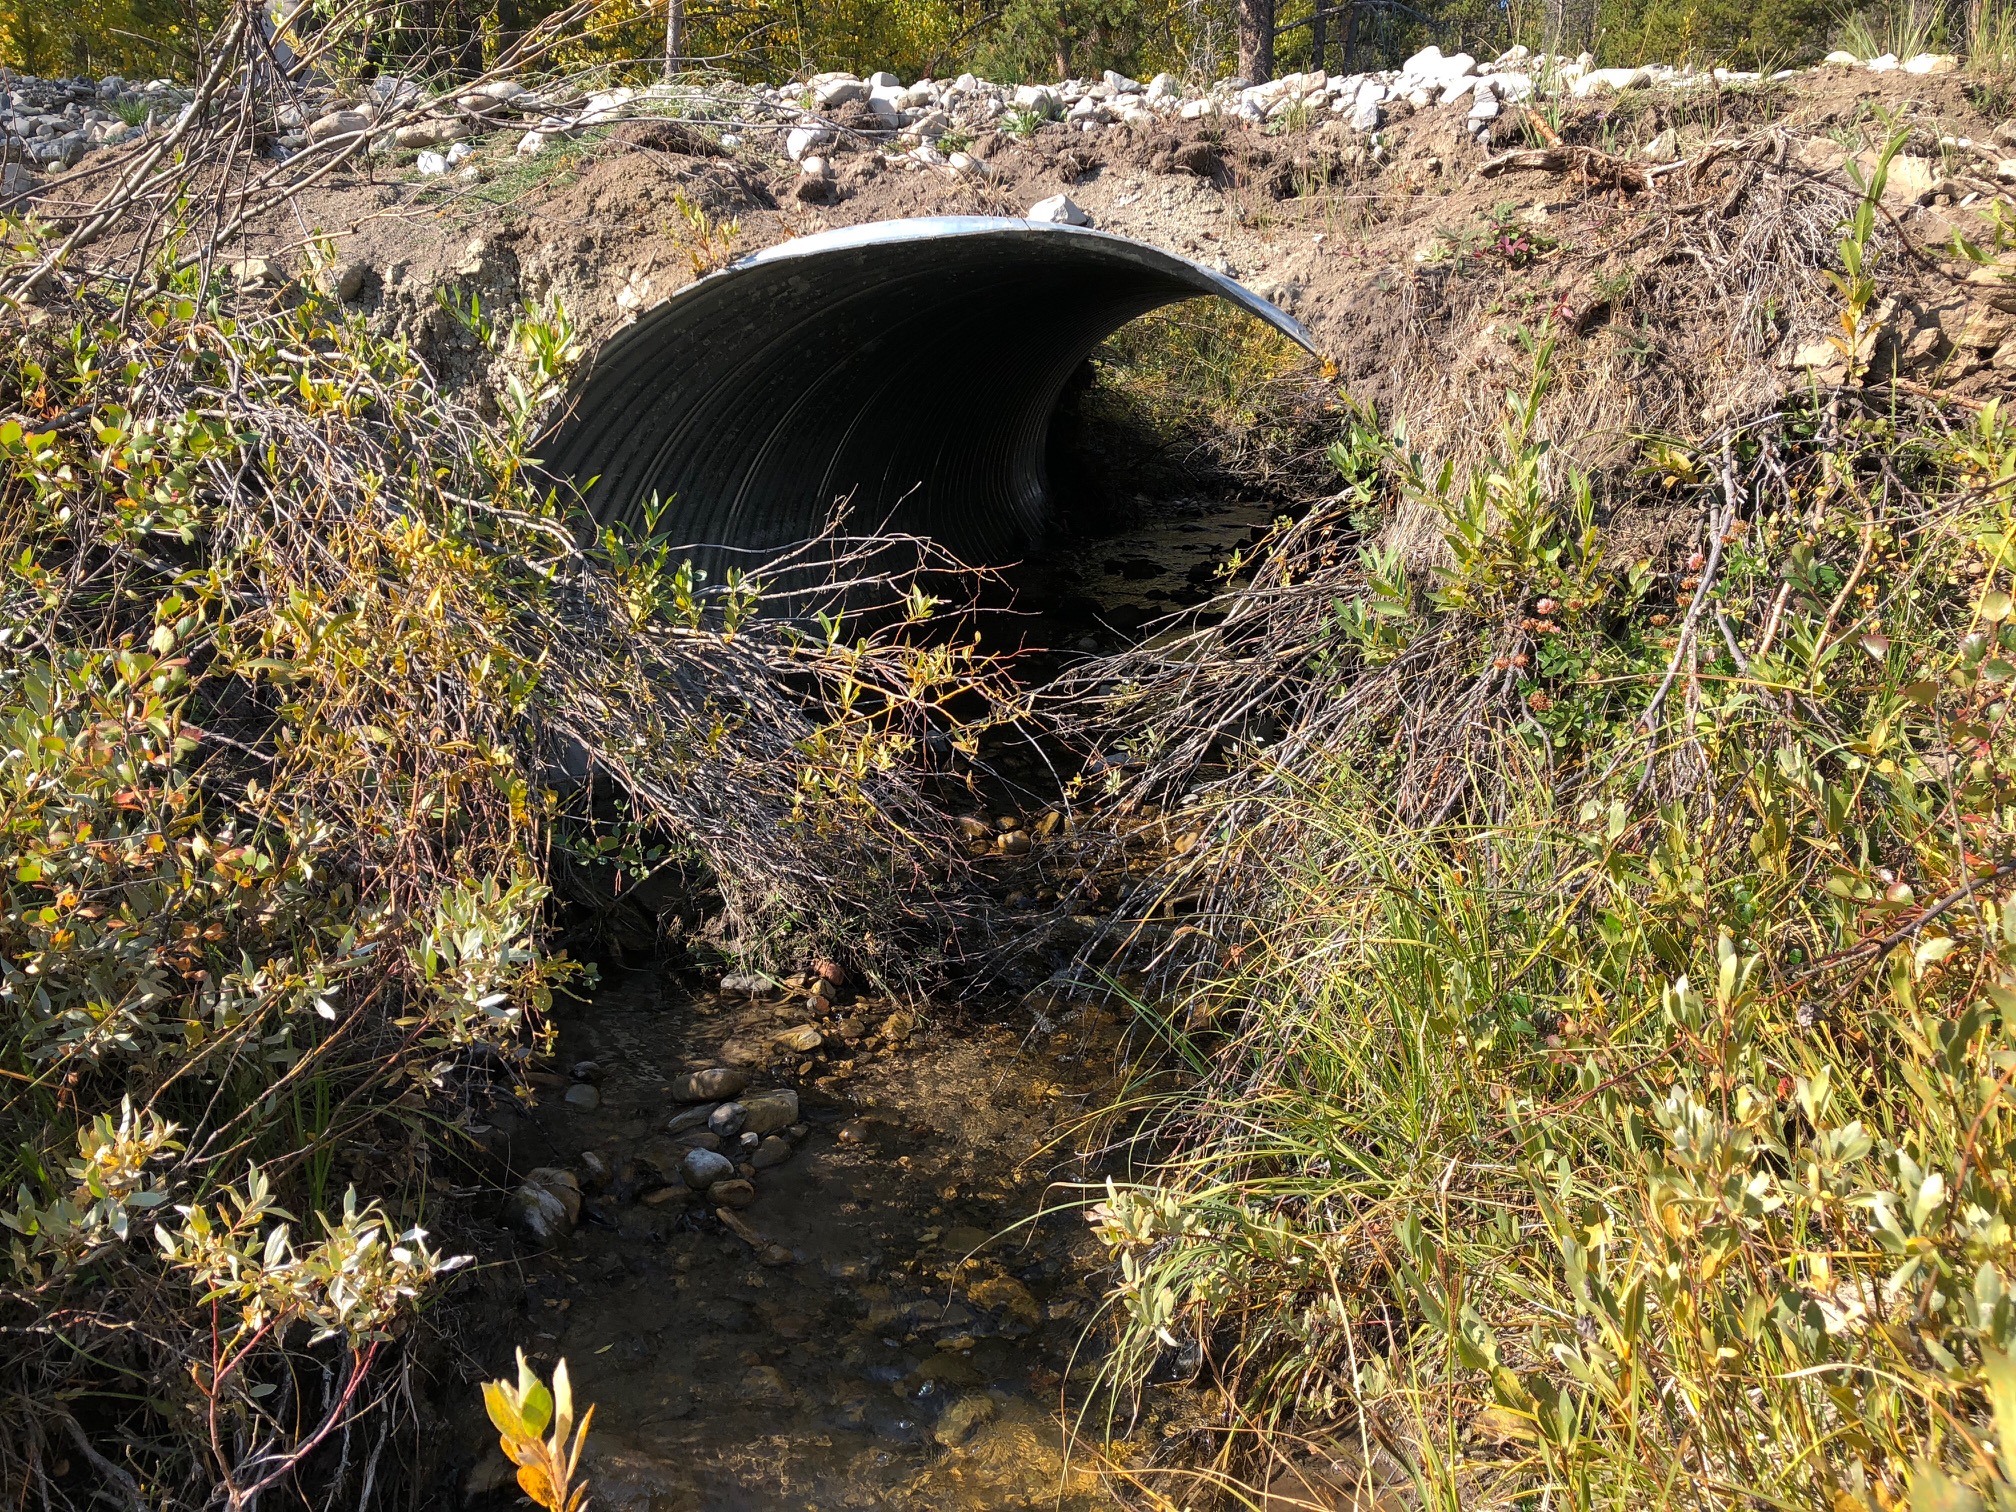 Culverts under the USFS road have been upsized to accommodate the streambed and 100 year flood for fish passage.